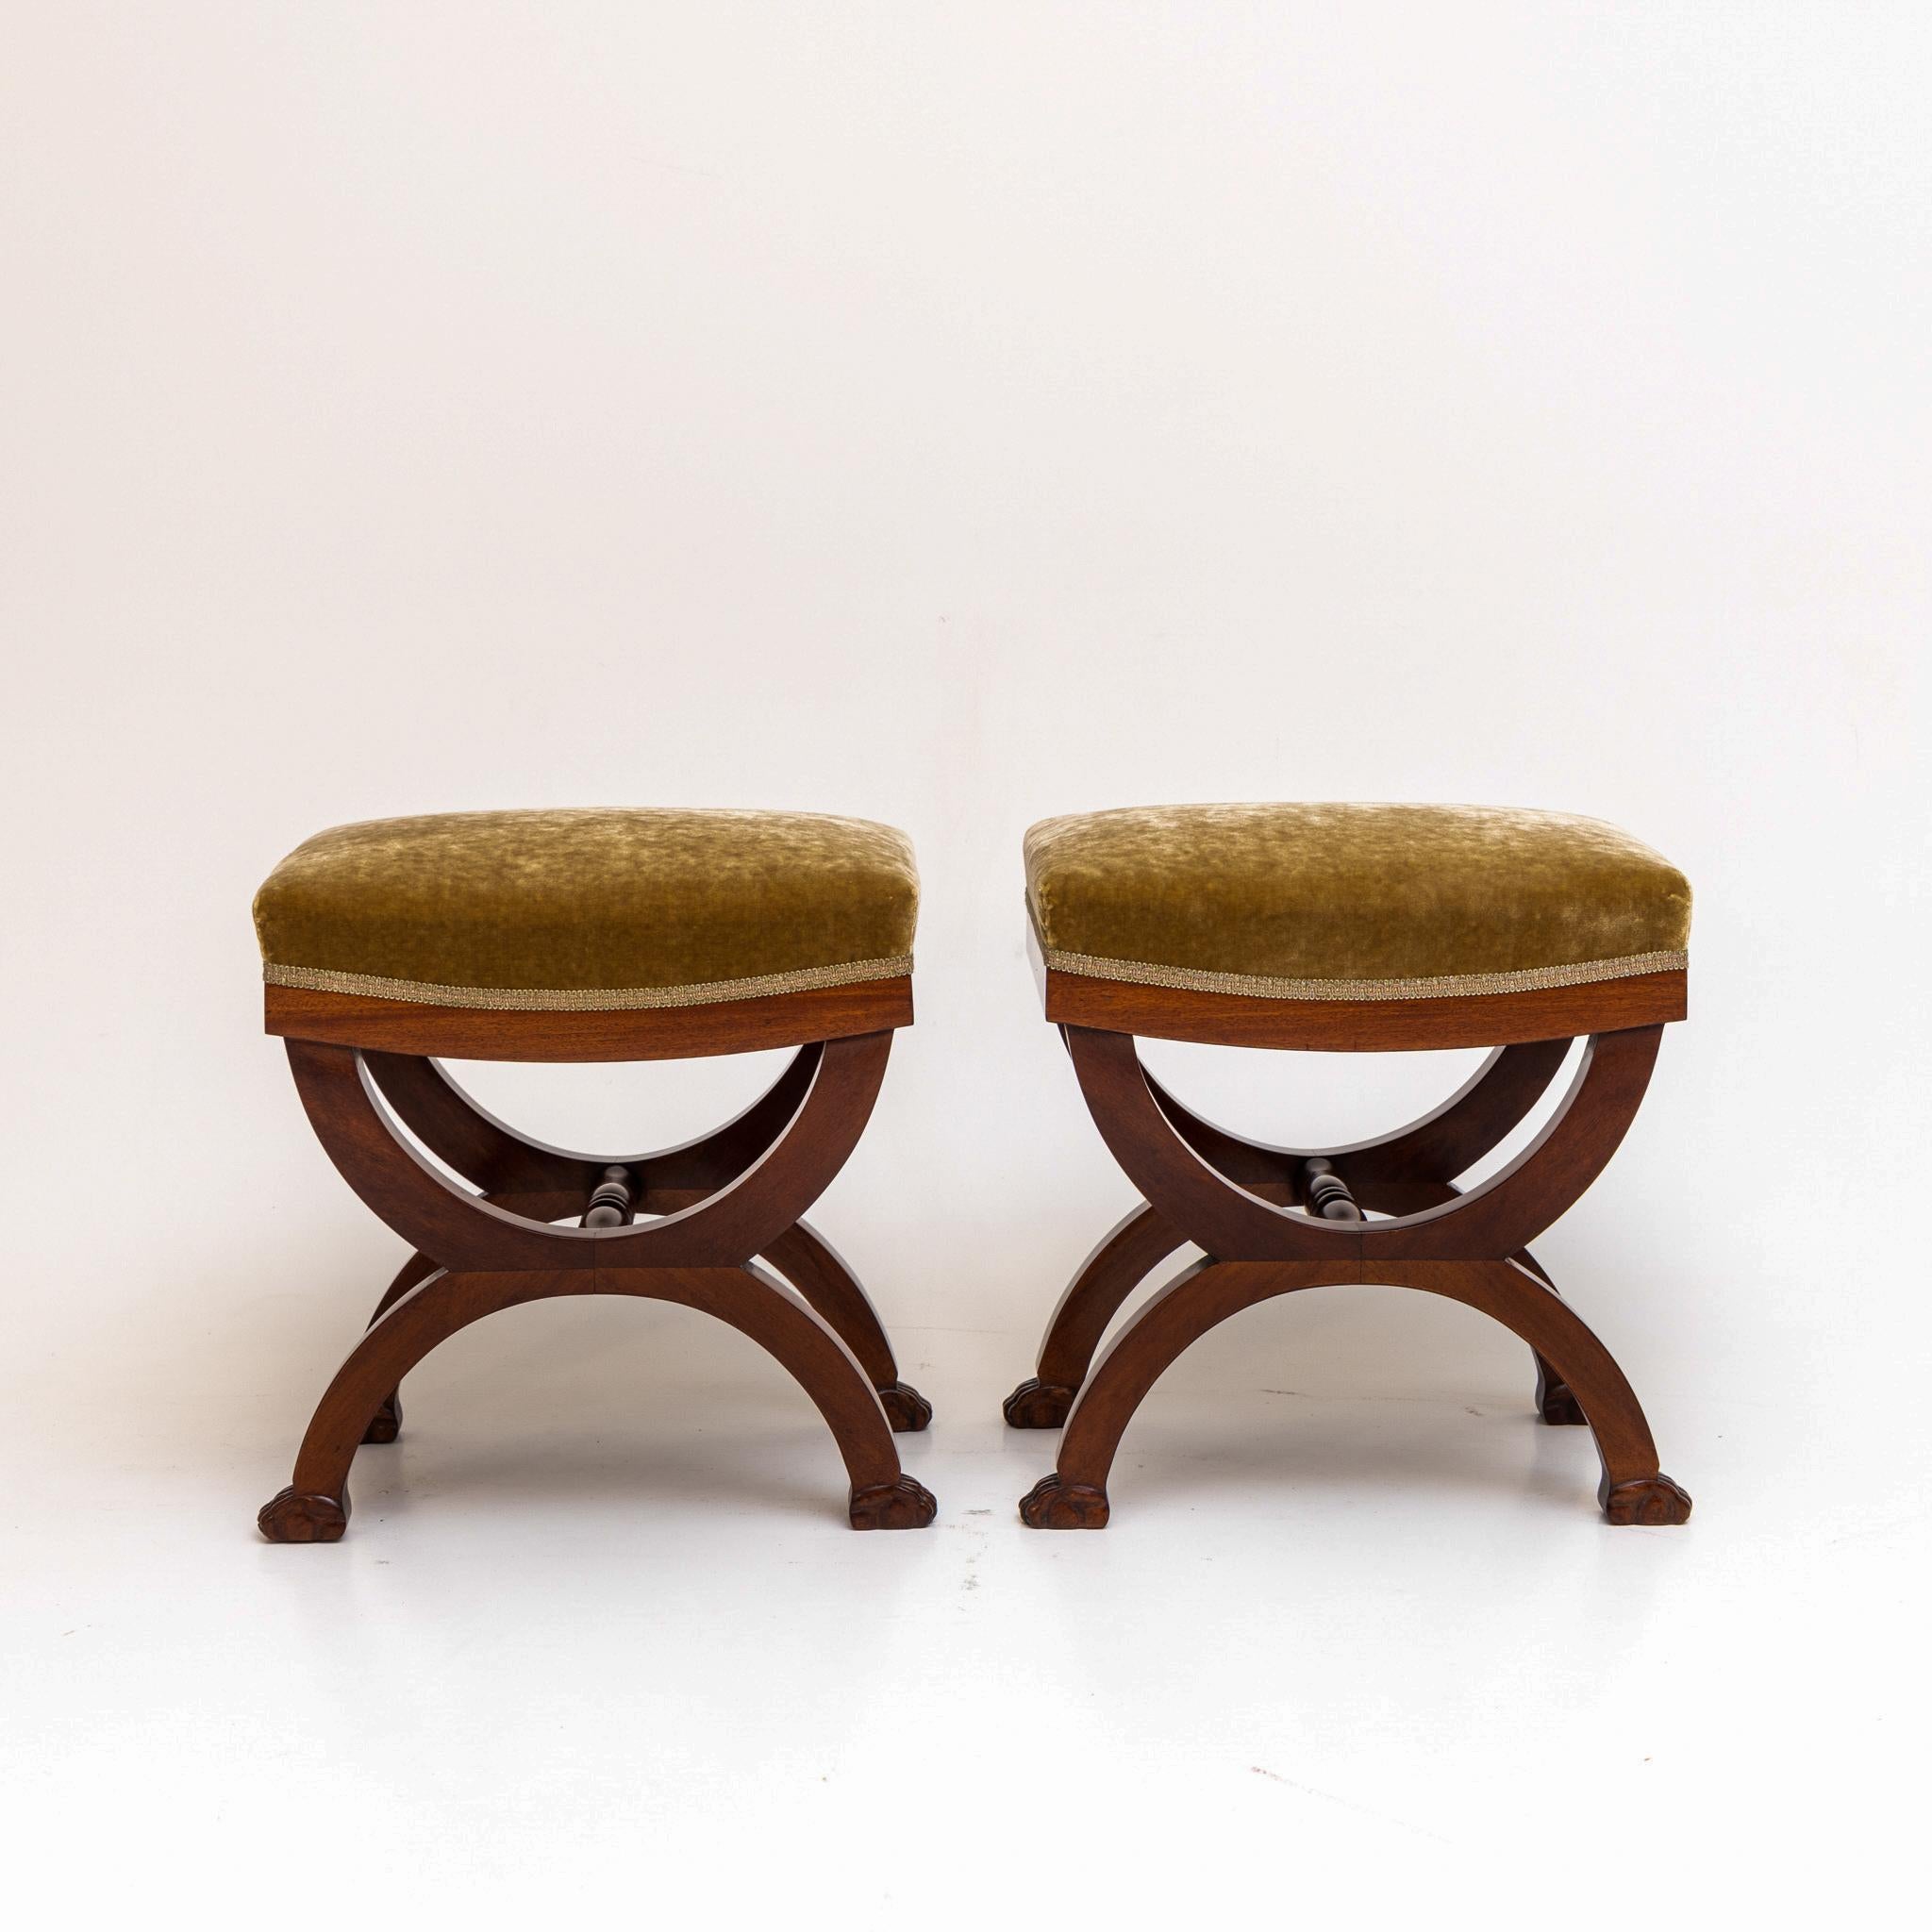 Empire Revival Pair of Tabourets, 2nd Half 19th Century